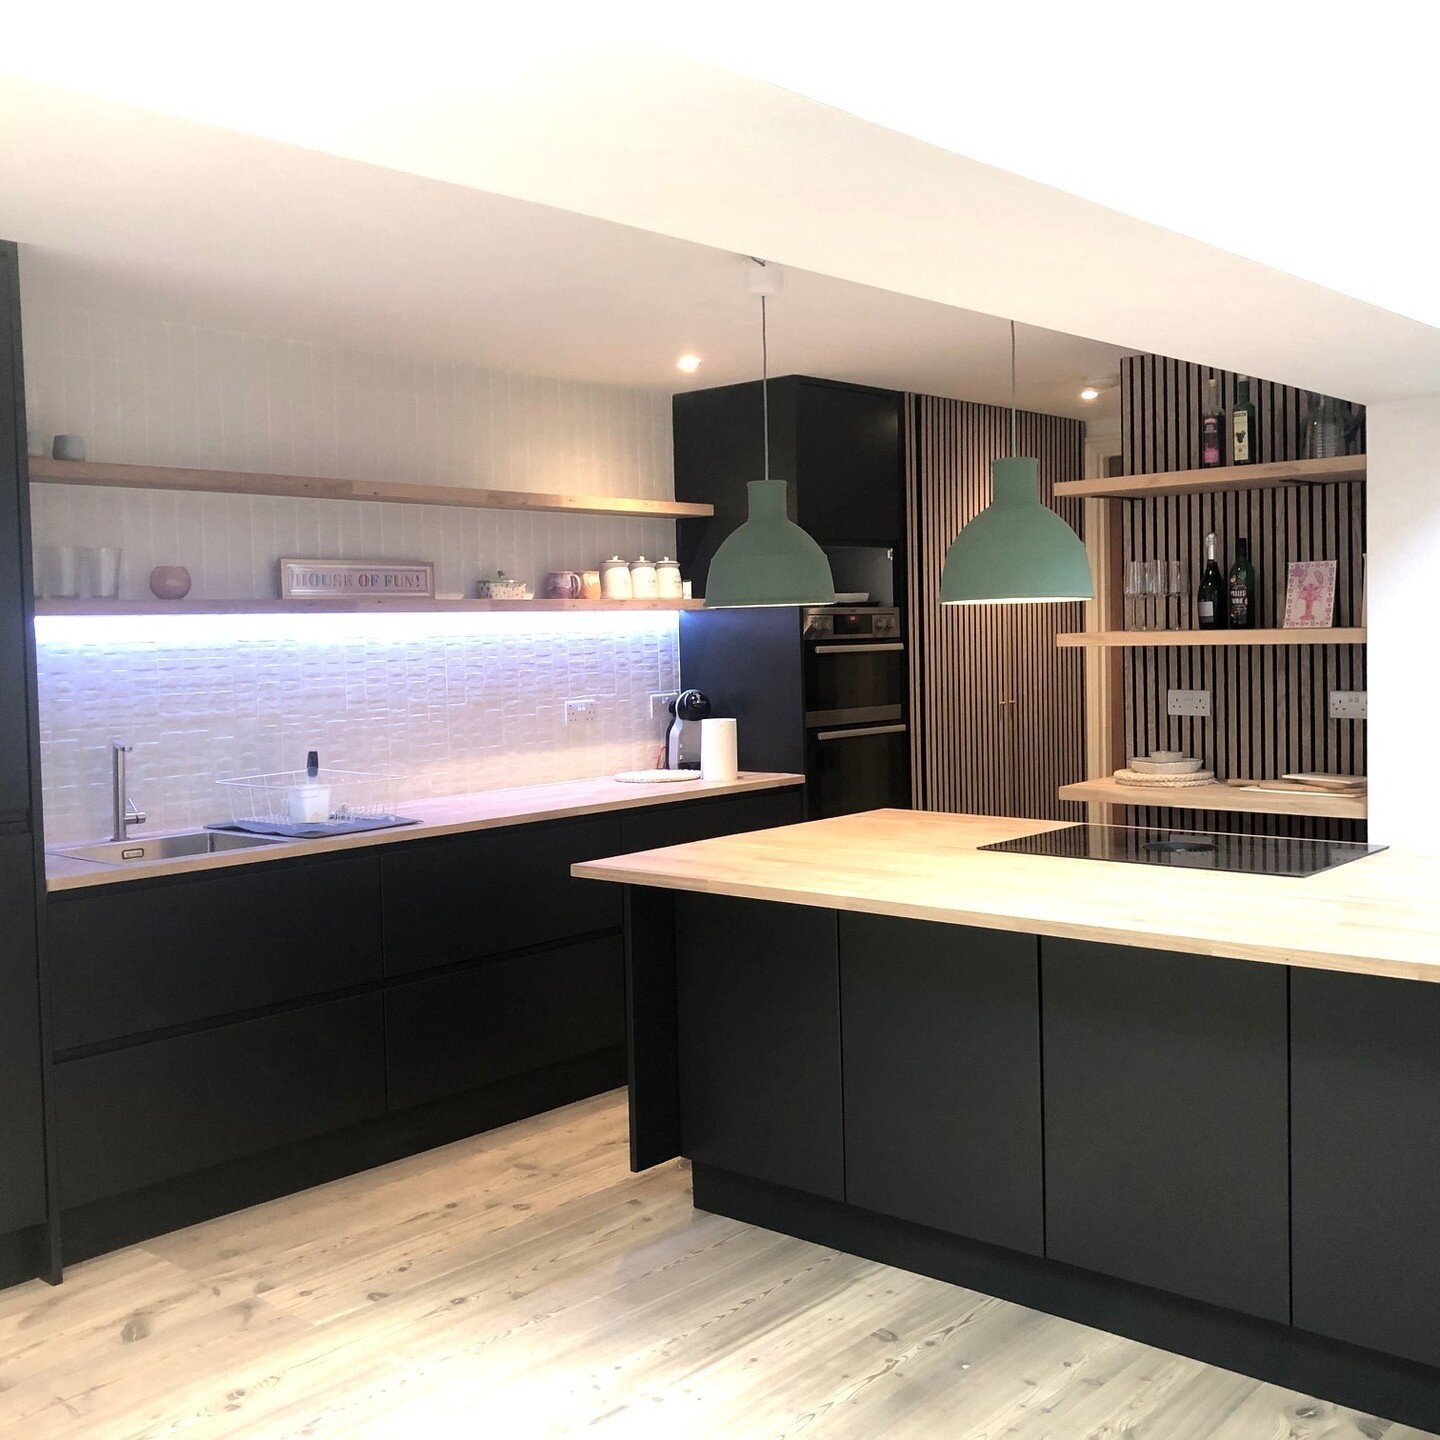 Curious to know more about our design service? Click the link in our bio to learn more about our complementary 'In-Home' Consultation service.

We specialise in modern house extensions and whole-house renovation projects. By focusing on structure, li